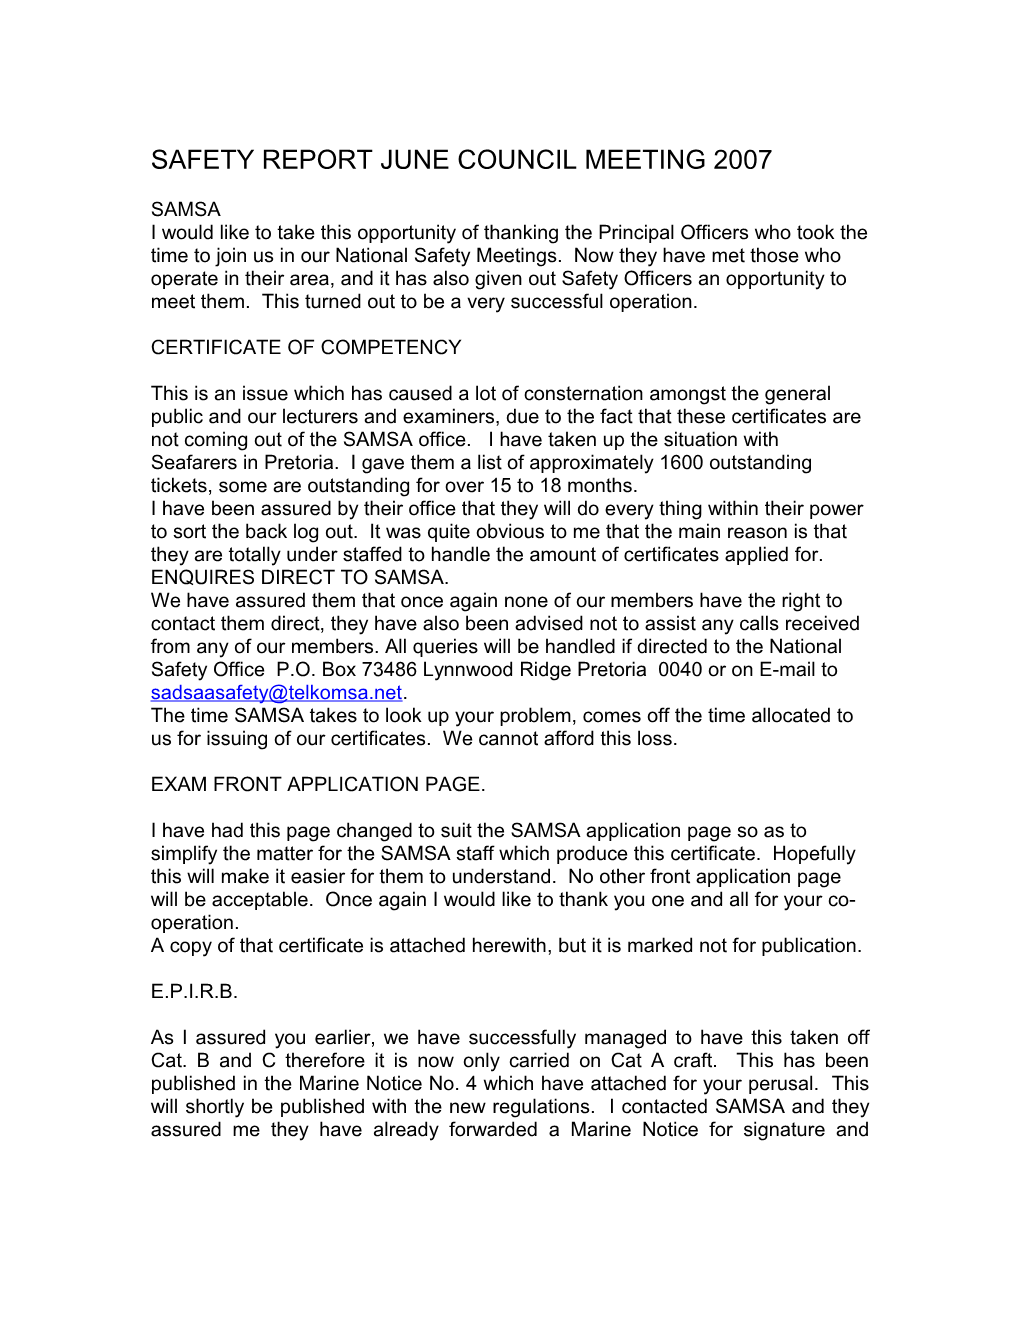 Safety Report June Council Meeting 2007